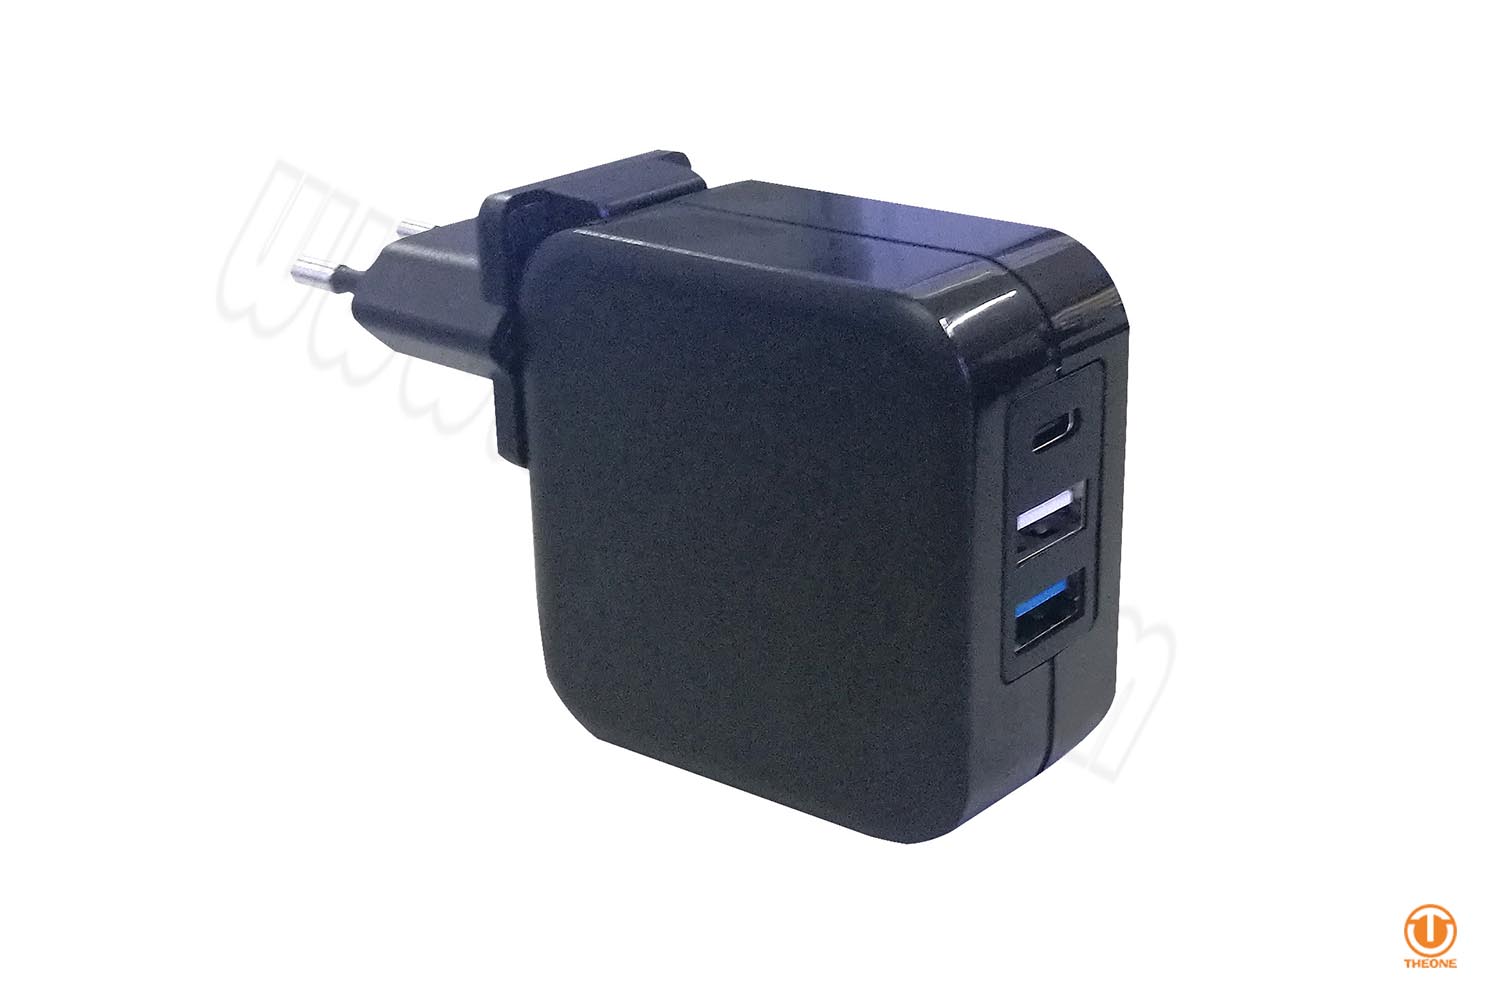 usb-c pd charger qc3.0 with interchangeable plugs